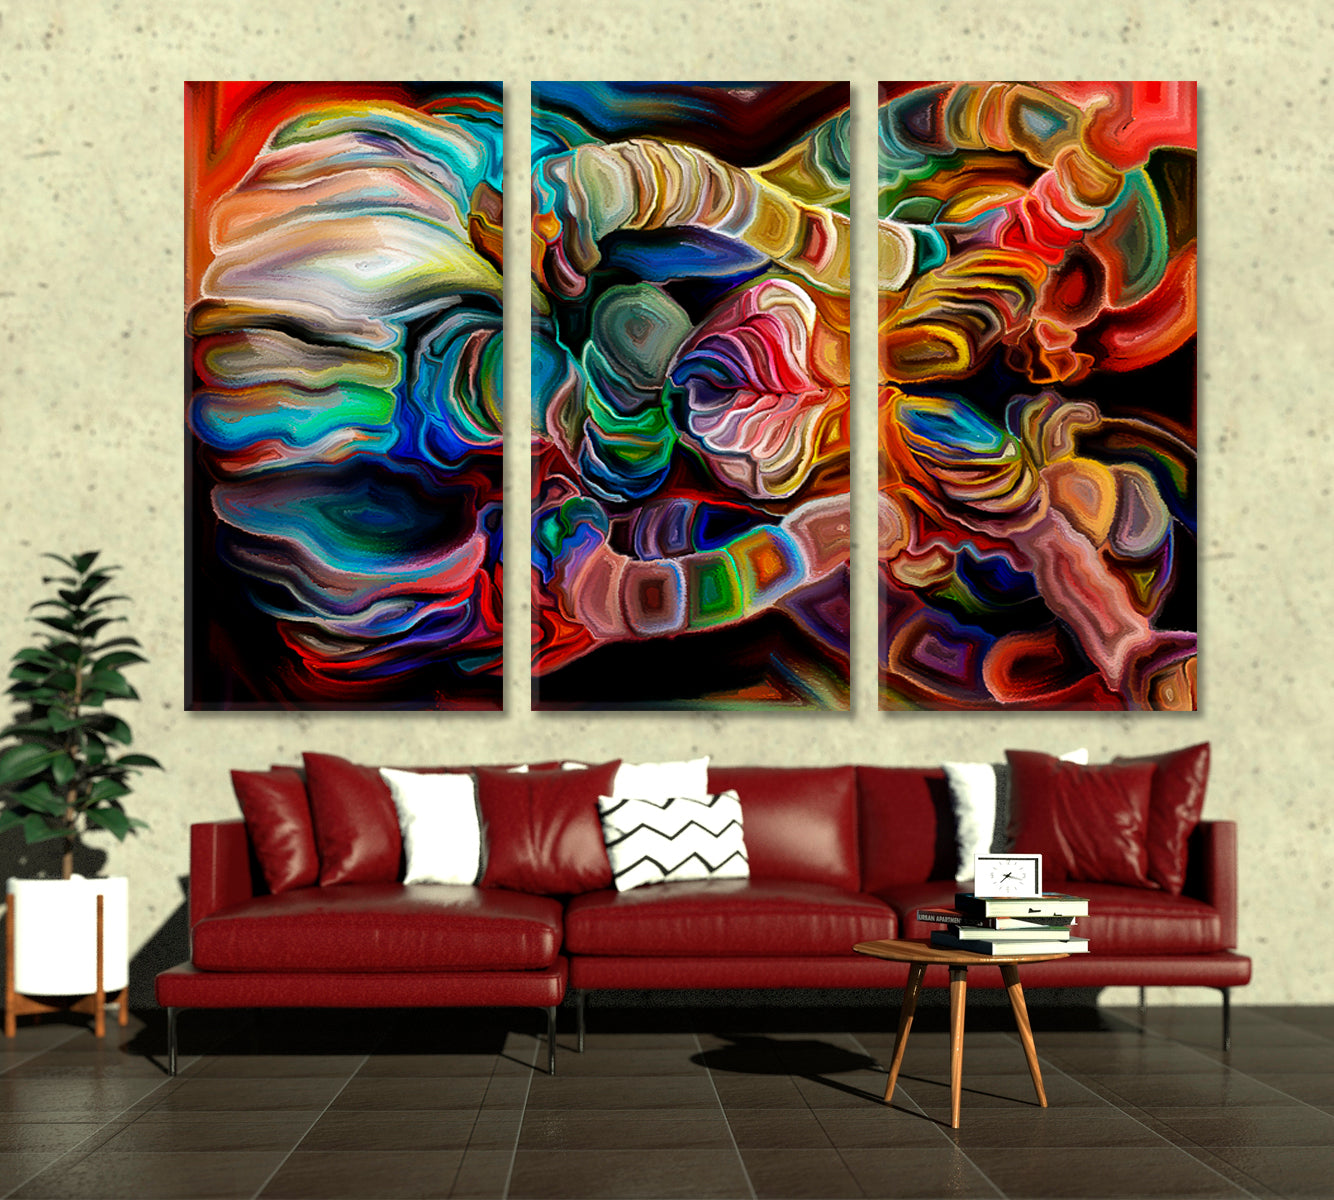 COLORS MOTION Abstract Pictorial and Artistic Effects Art Abstract Art Print Artesty 3 panels 36" x 24" 